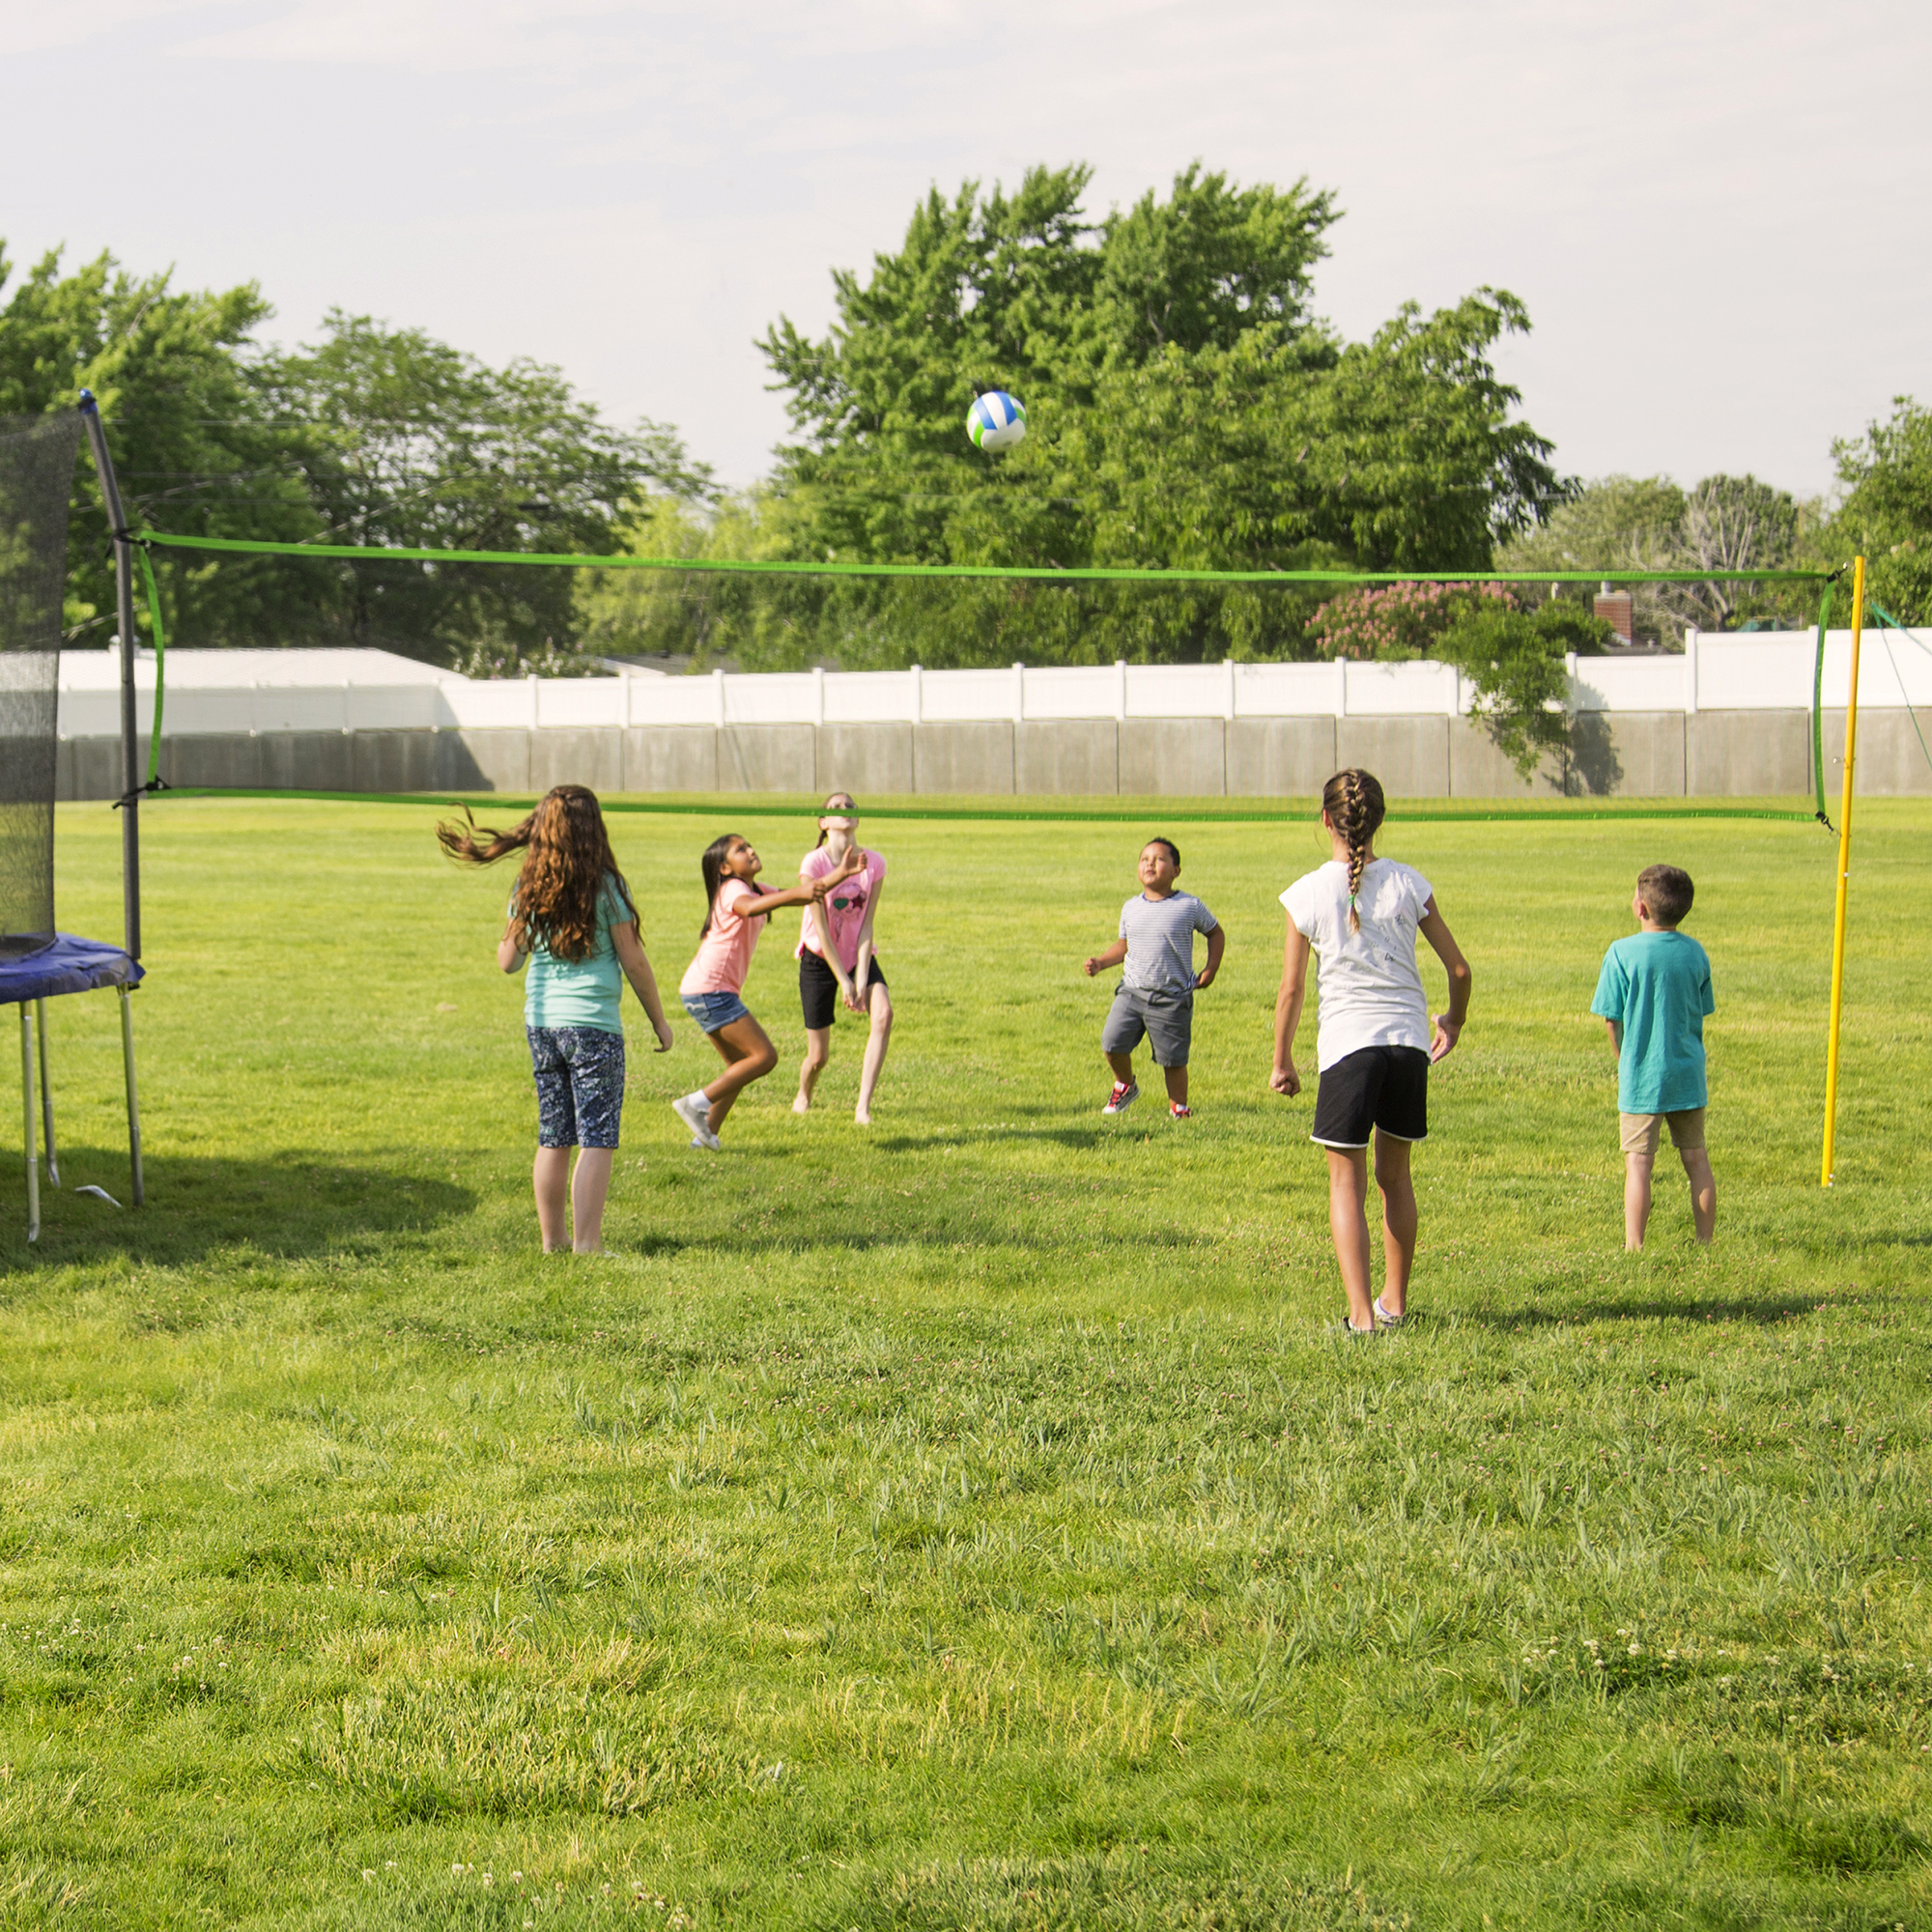 Skywalker Trampolines Volleyball Net Accessory - image 4 of 6